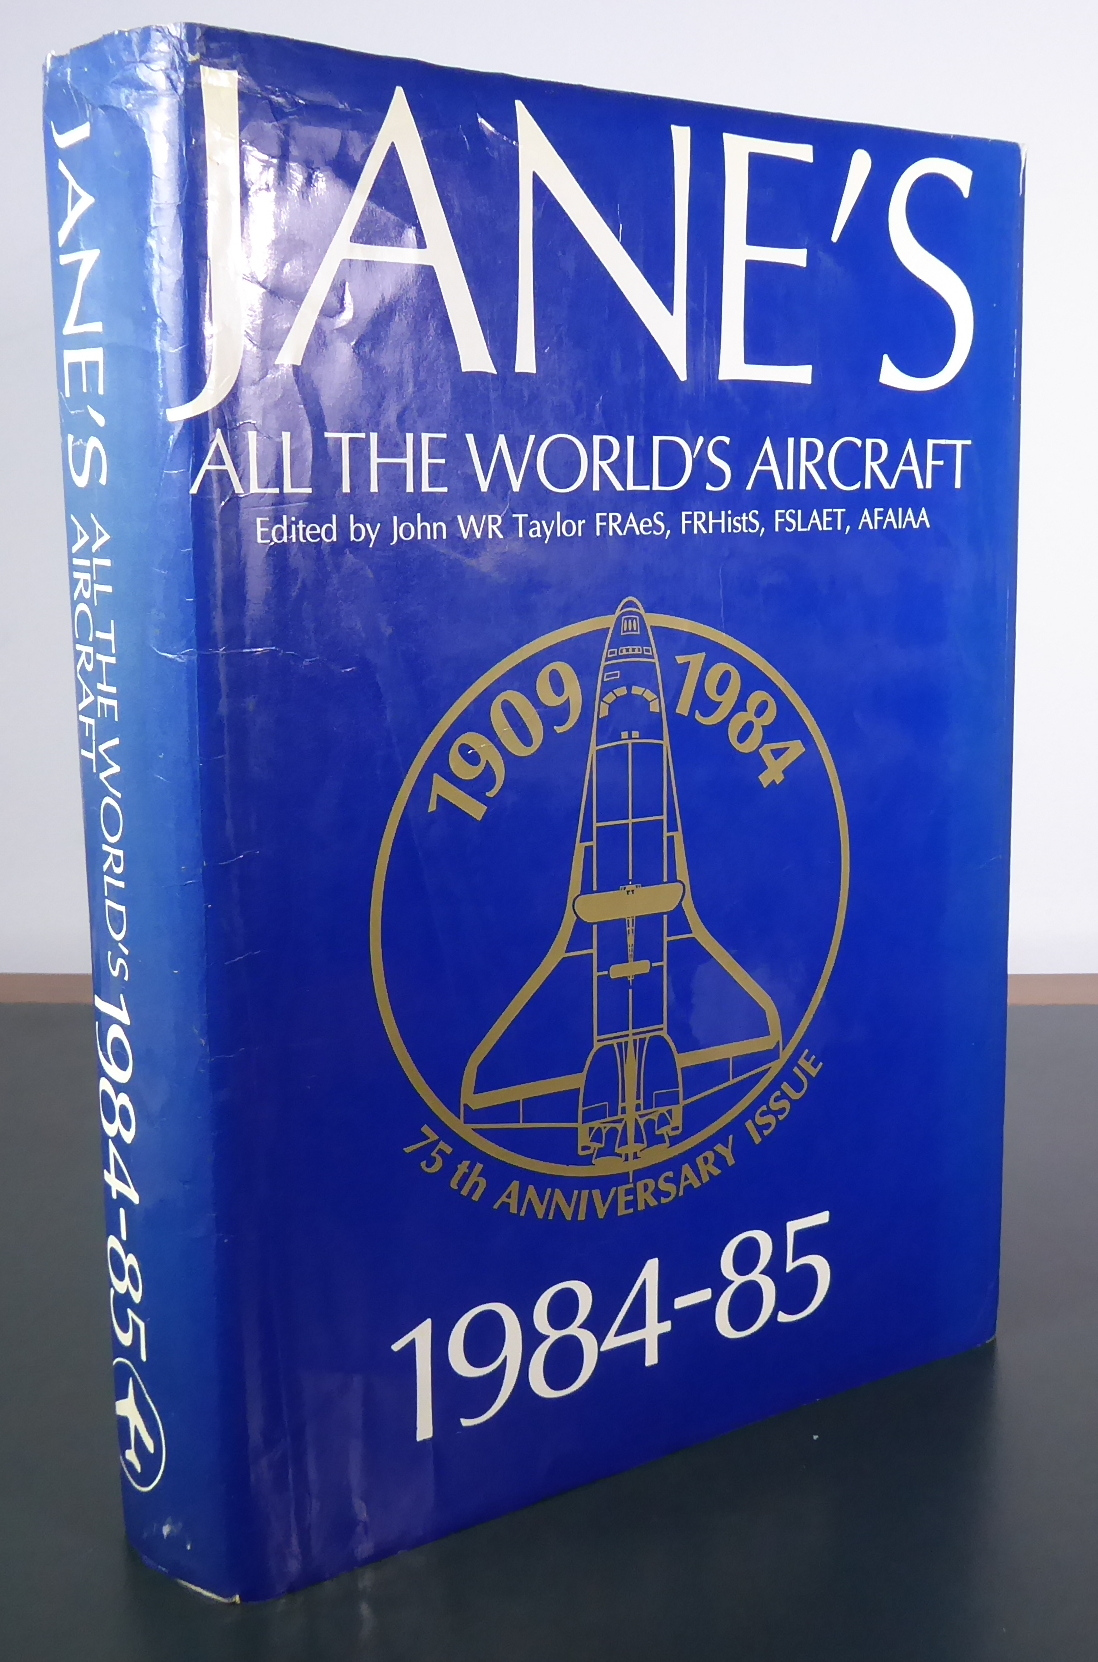 TAYLOR, JOHN W R (EDITED BY) - Jane's All the World's Aircraft, 1984-85